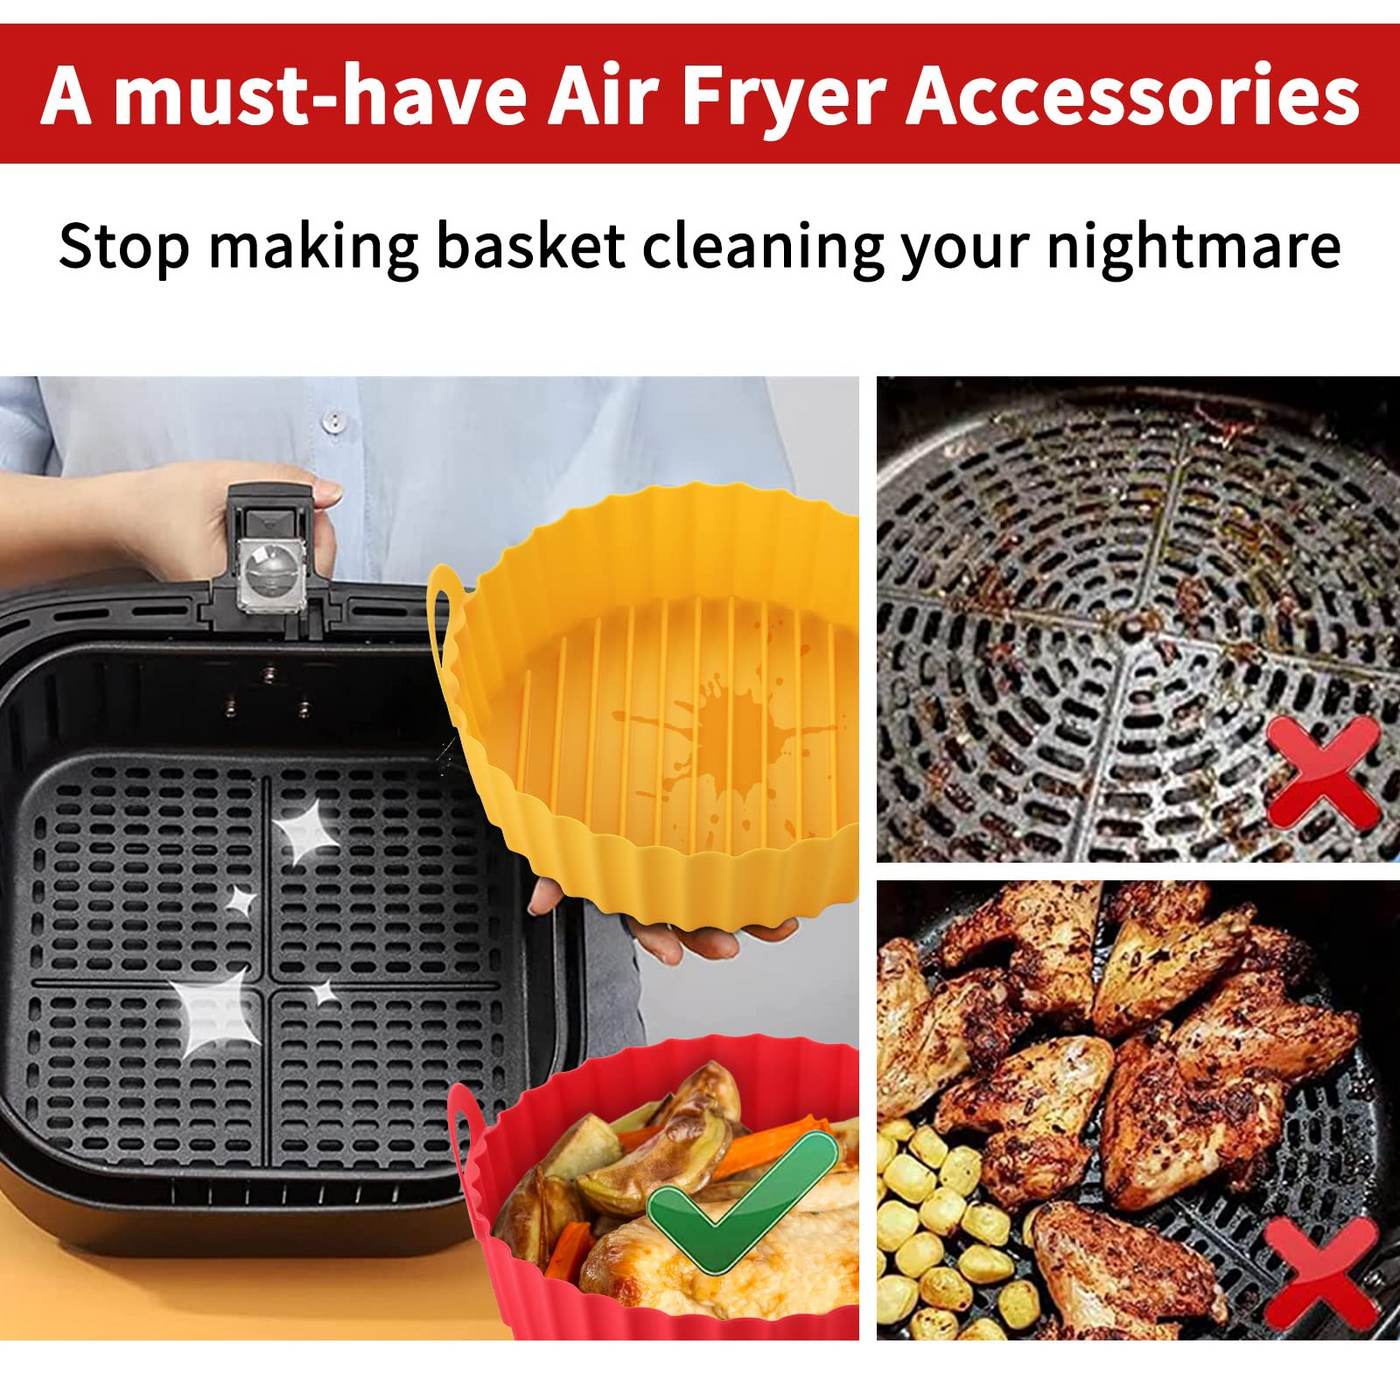 These $11 Reusable Liners Make Cleaning Air Fryers 'a Breeze